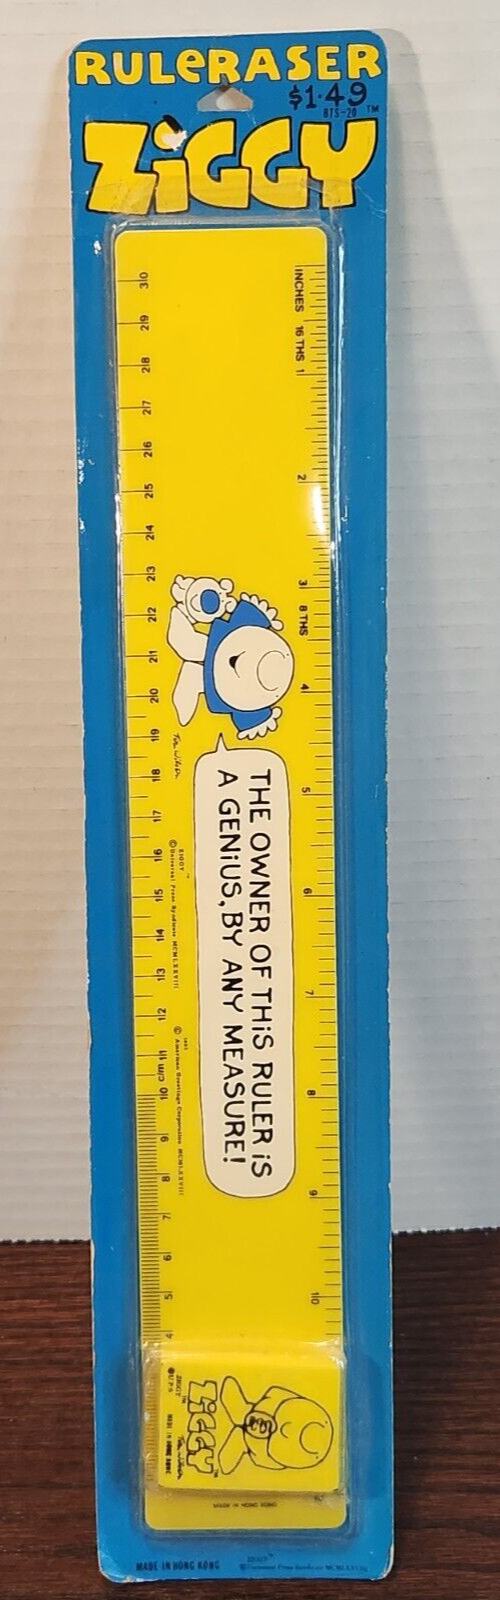 Vintage 1970s Ziggy Ruleraser Universal Press Syndicate Yellow Ruler NEW